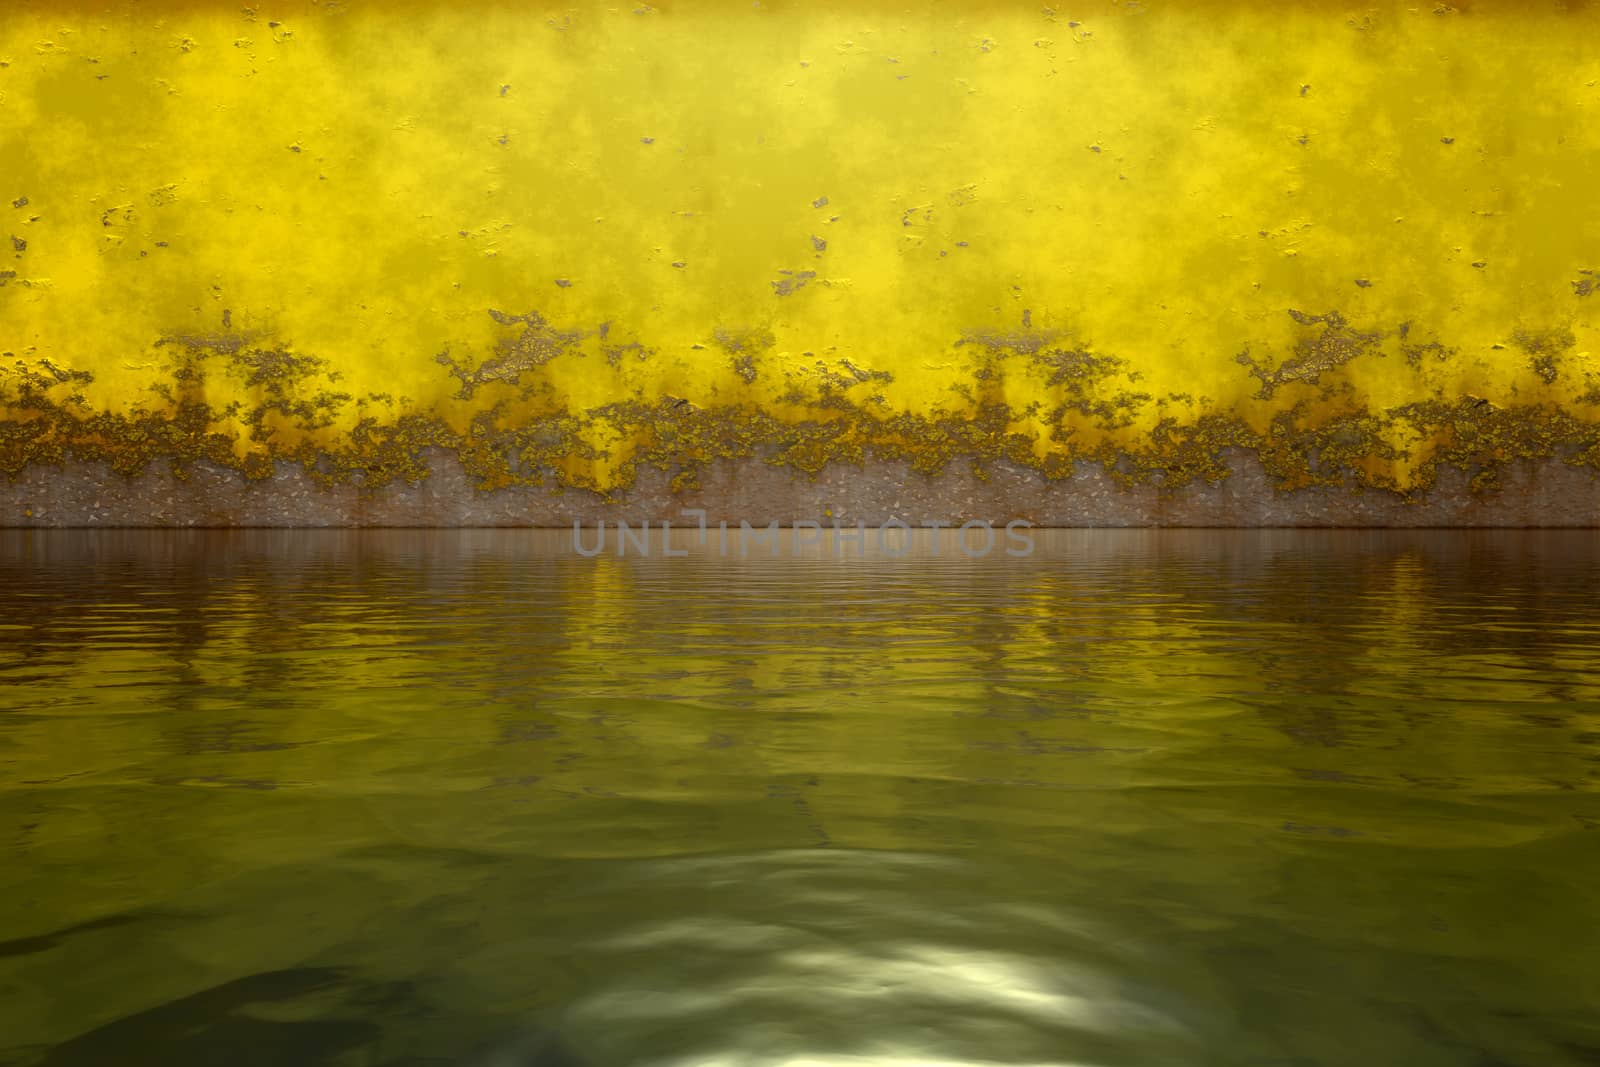 rusty metal wall water surface 3D illustration